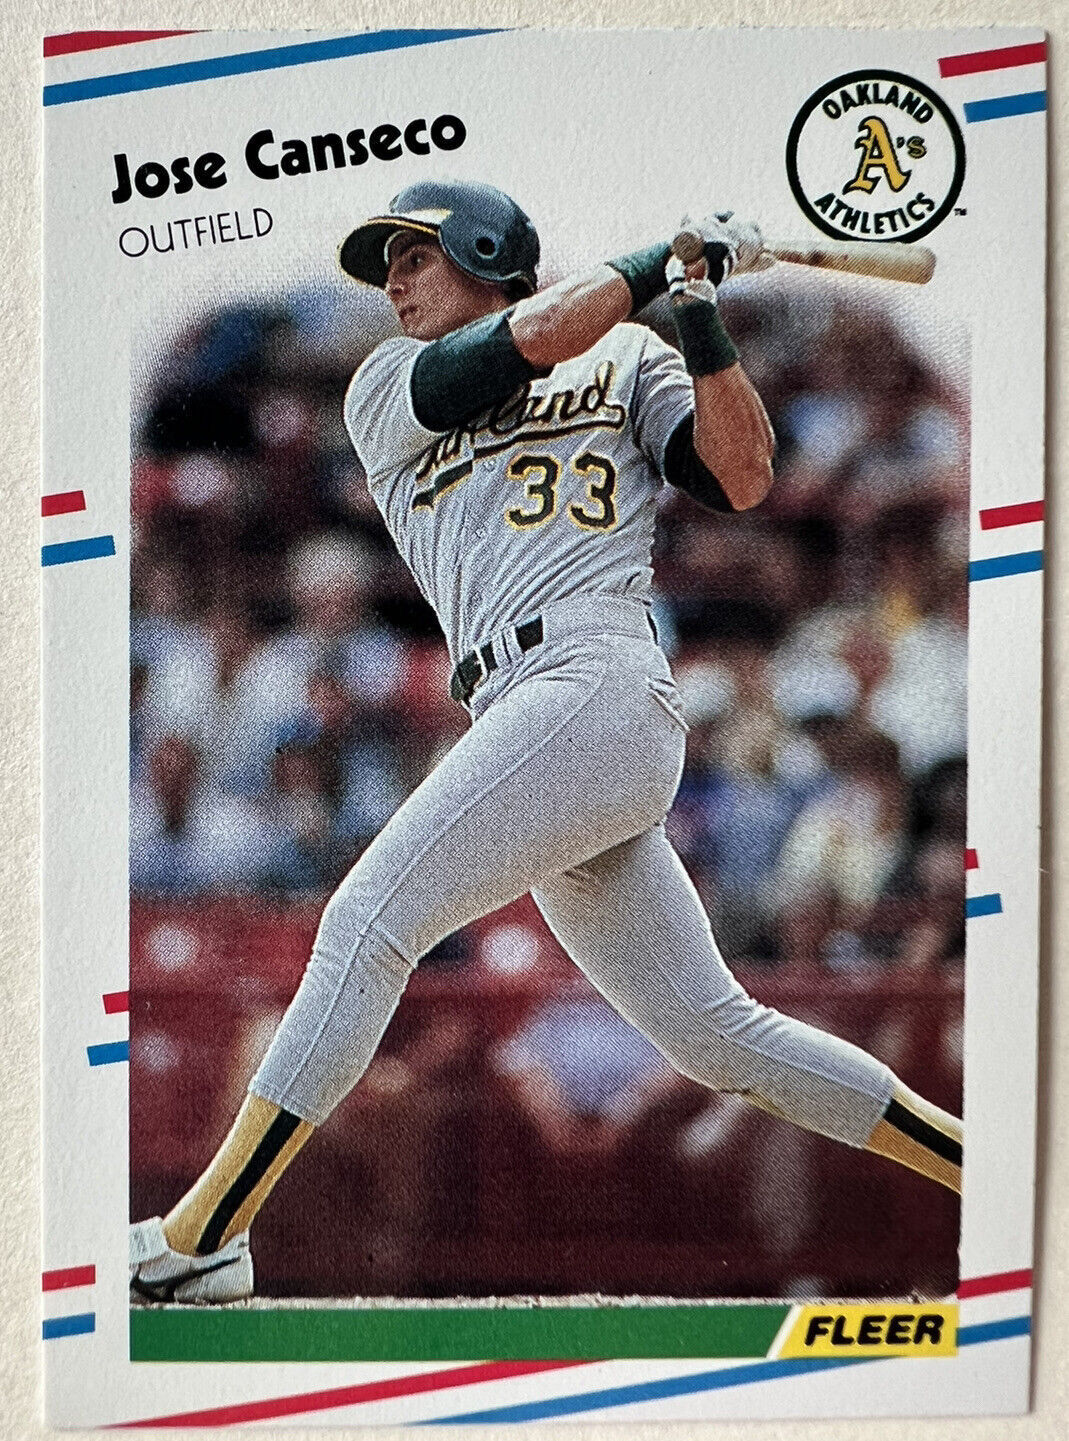 Jose Canseco 1988 Fleer Series Mint Card #276